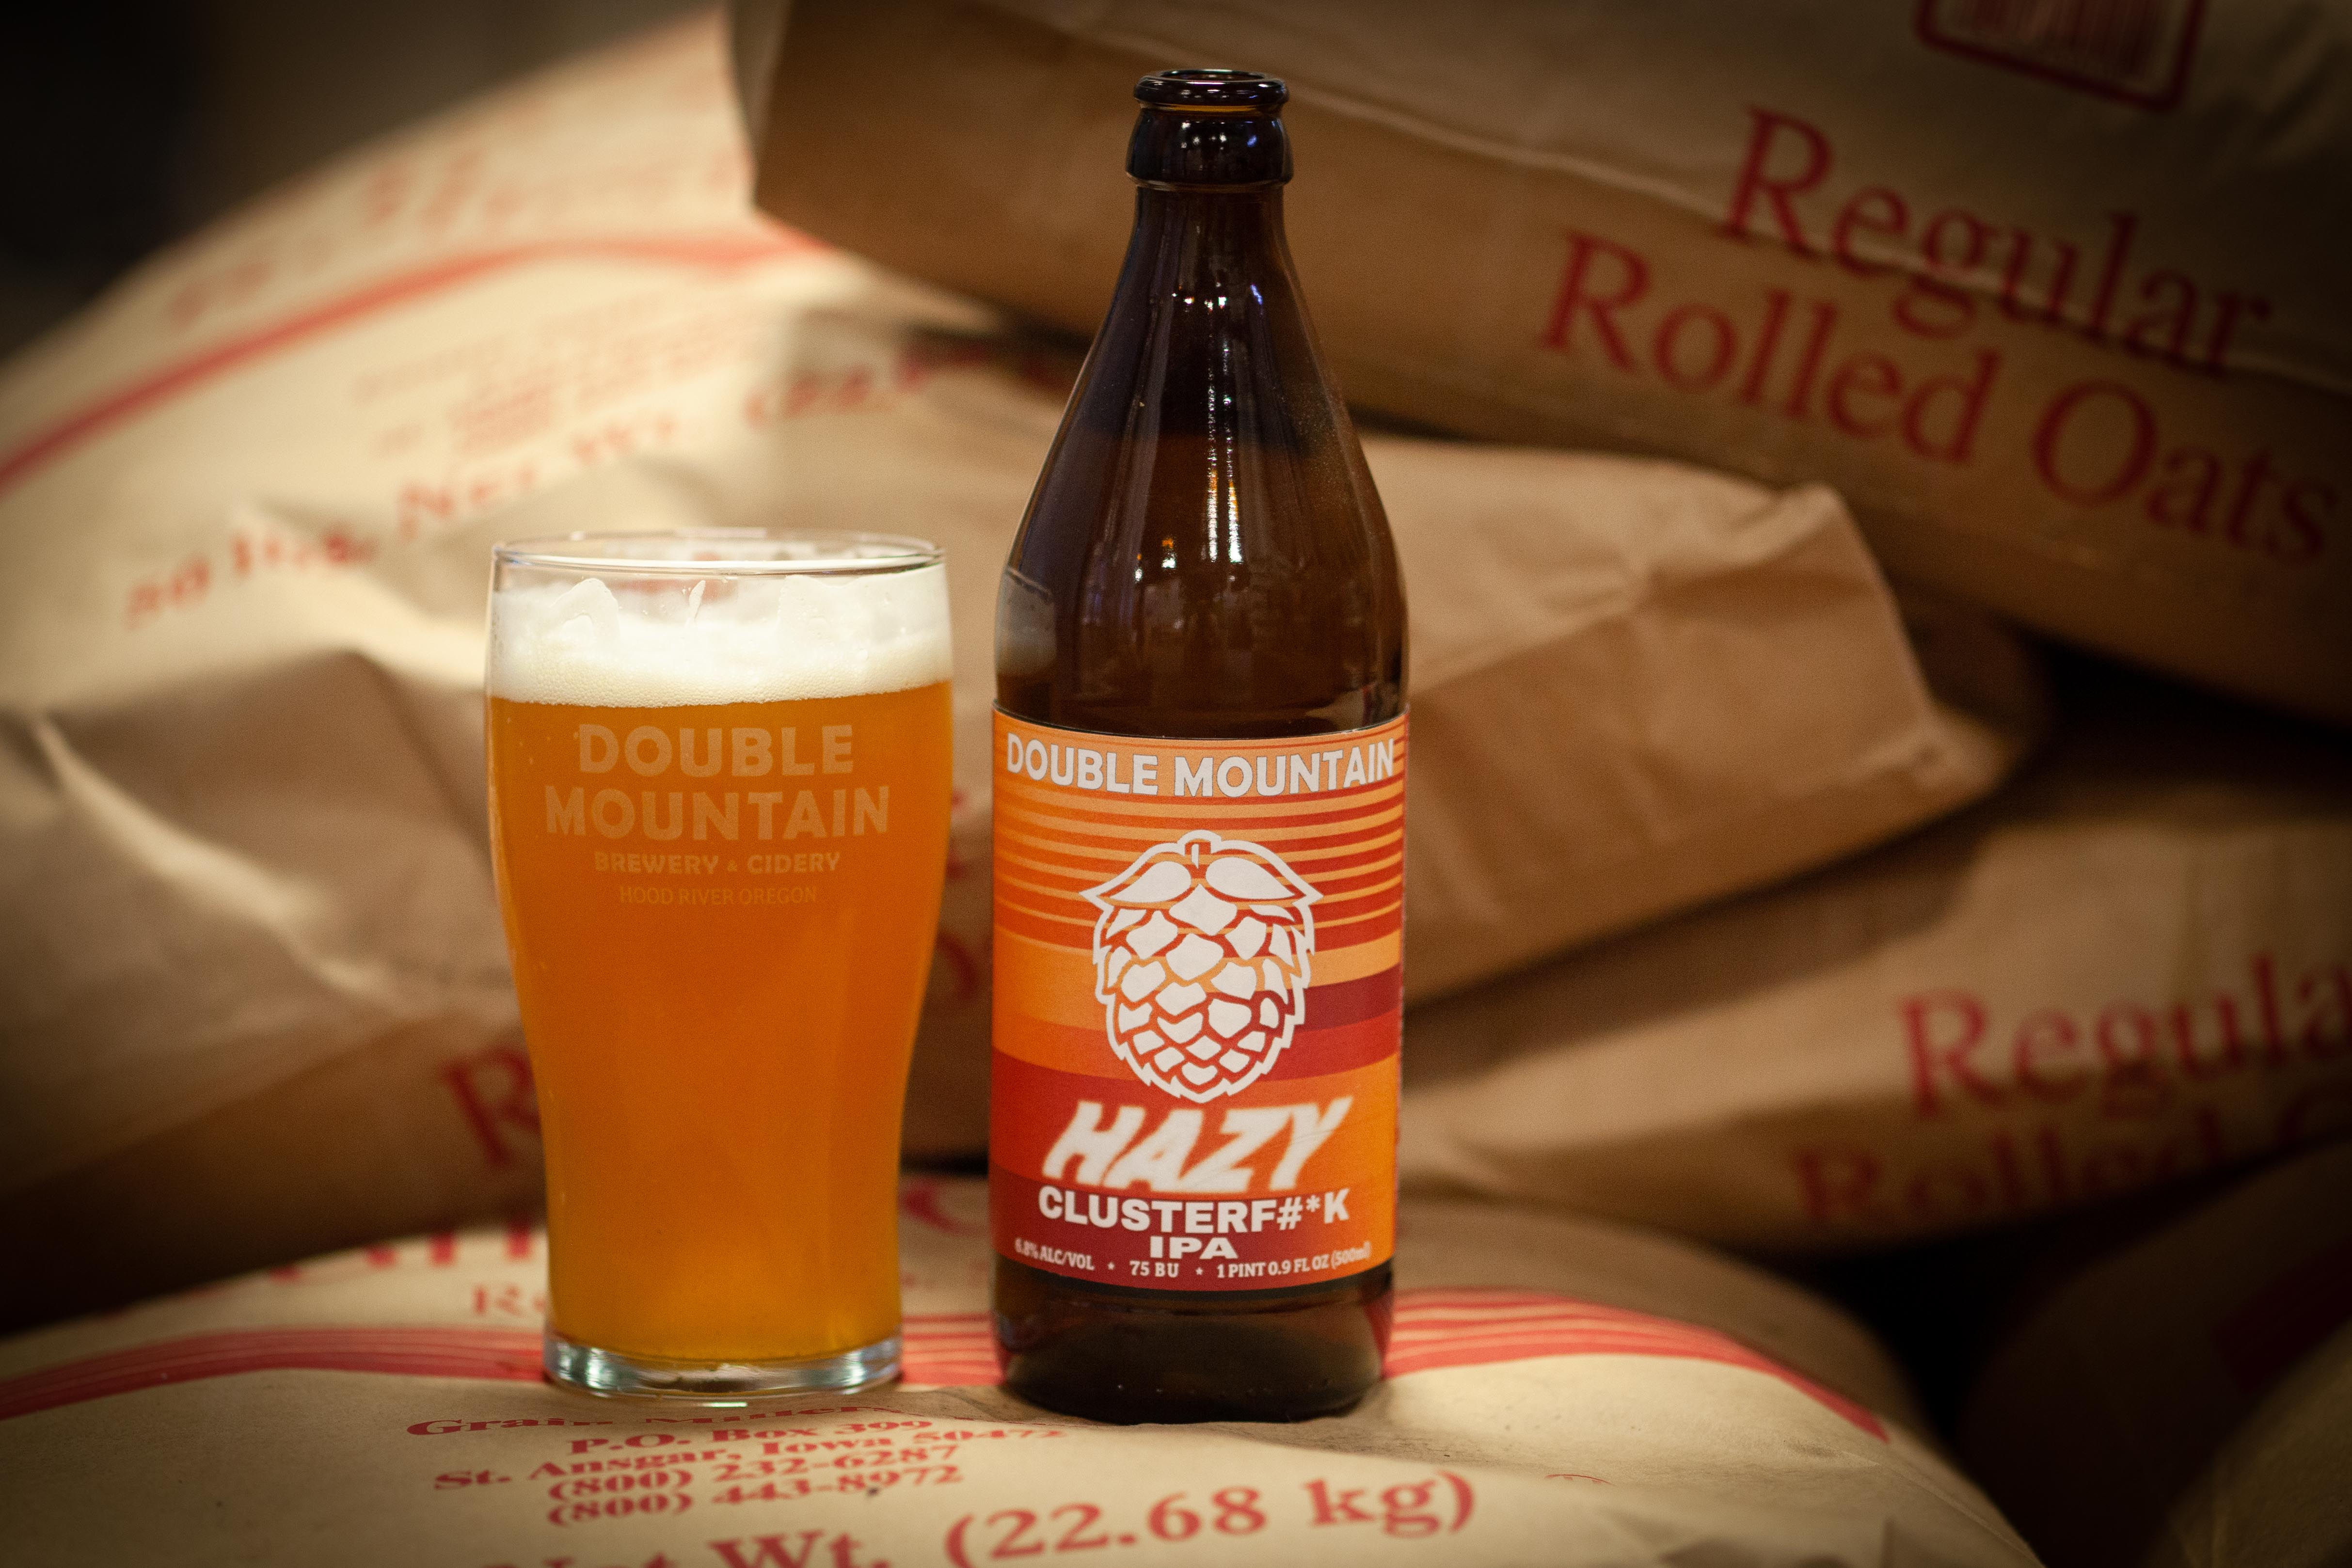 image of Hazy Clusterf#*k IPA courtesy of Double Mountain Brewery